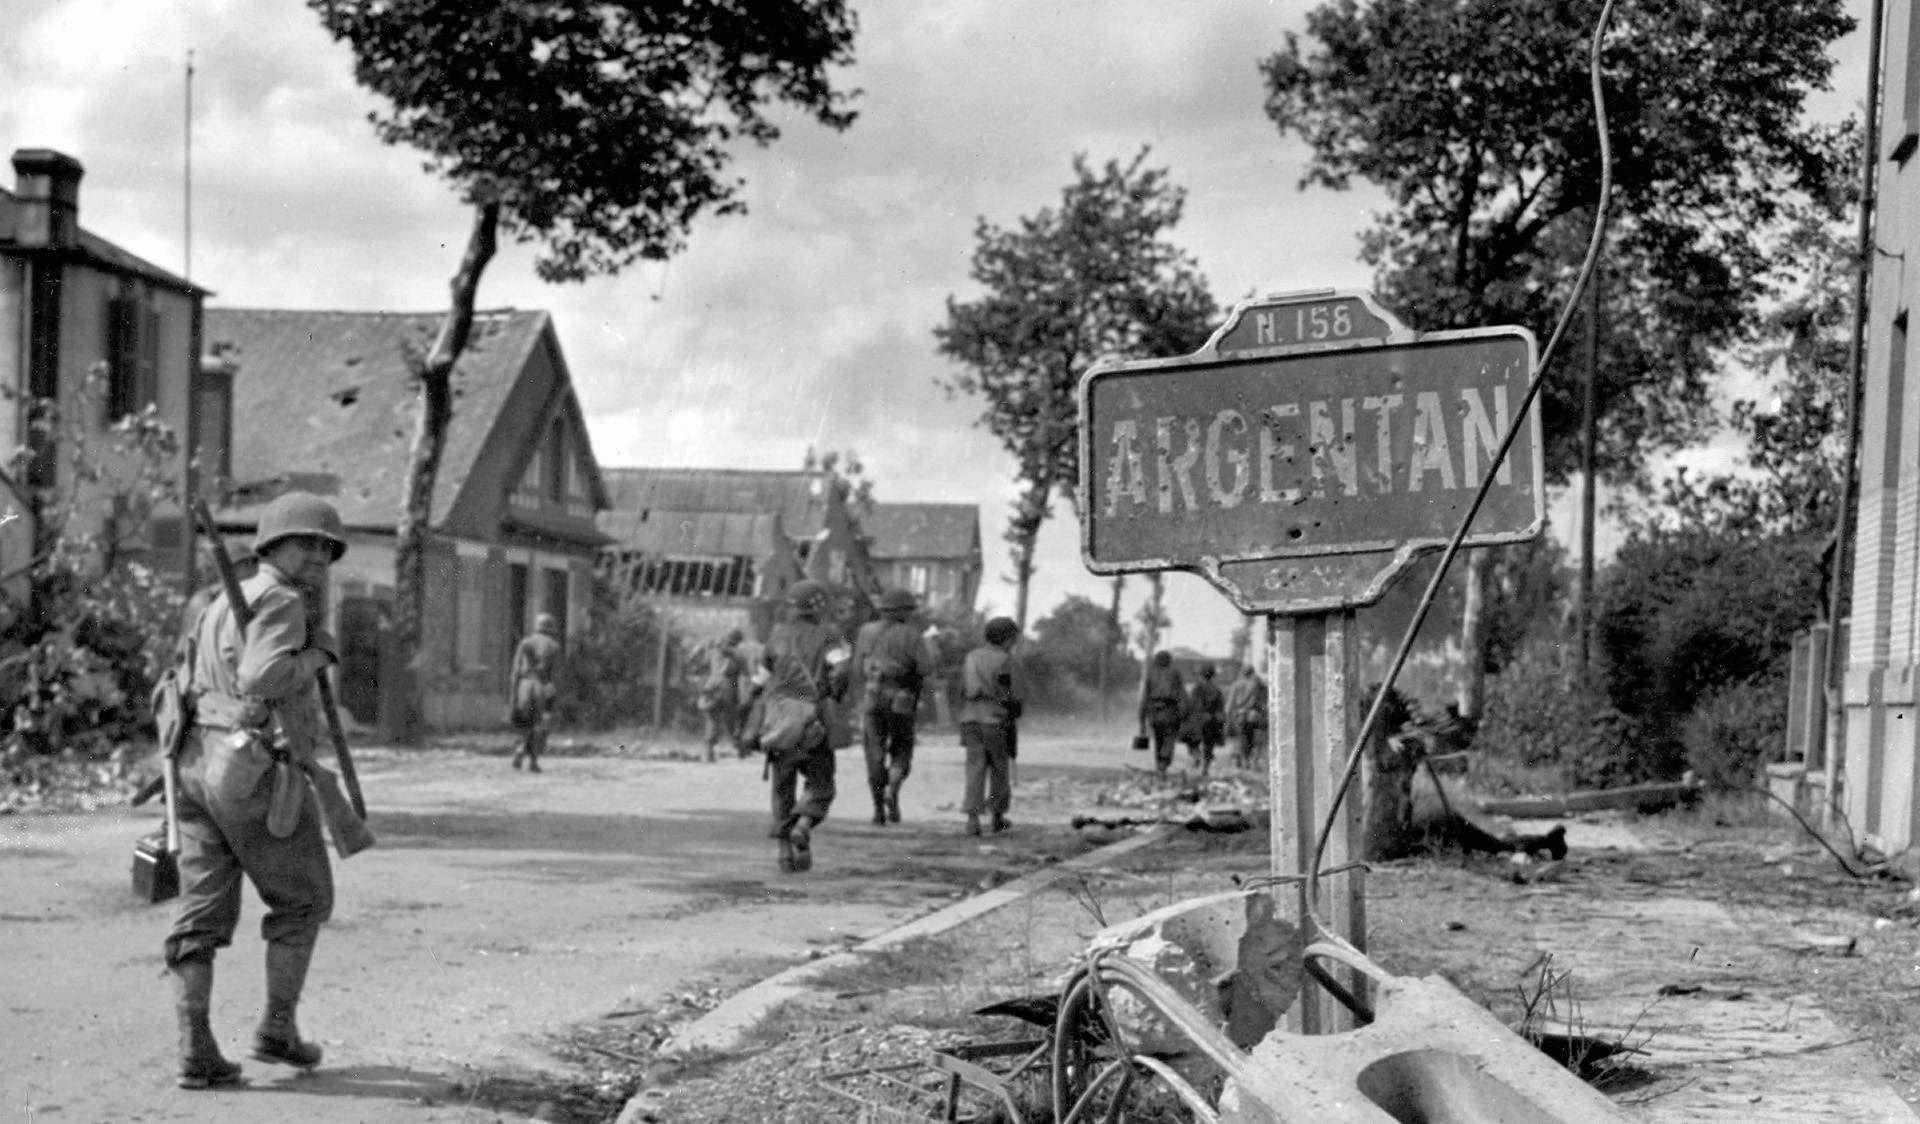 An American rifleman glances back at the photographer as his unit enters the shot-up town of Argentan, August 20, 1944.